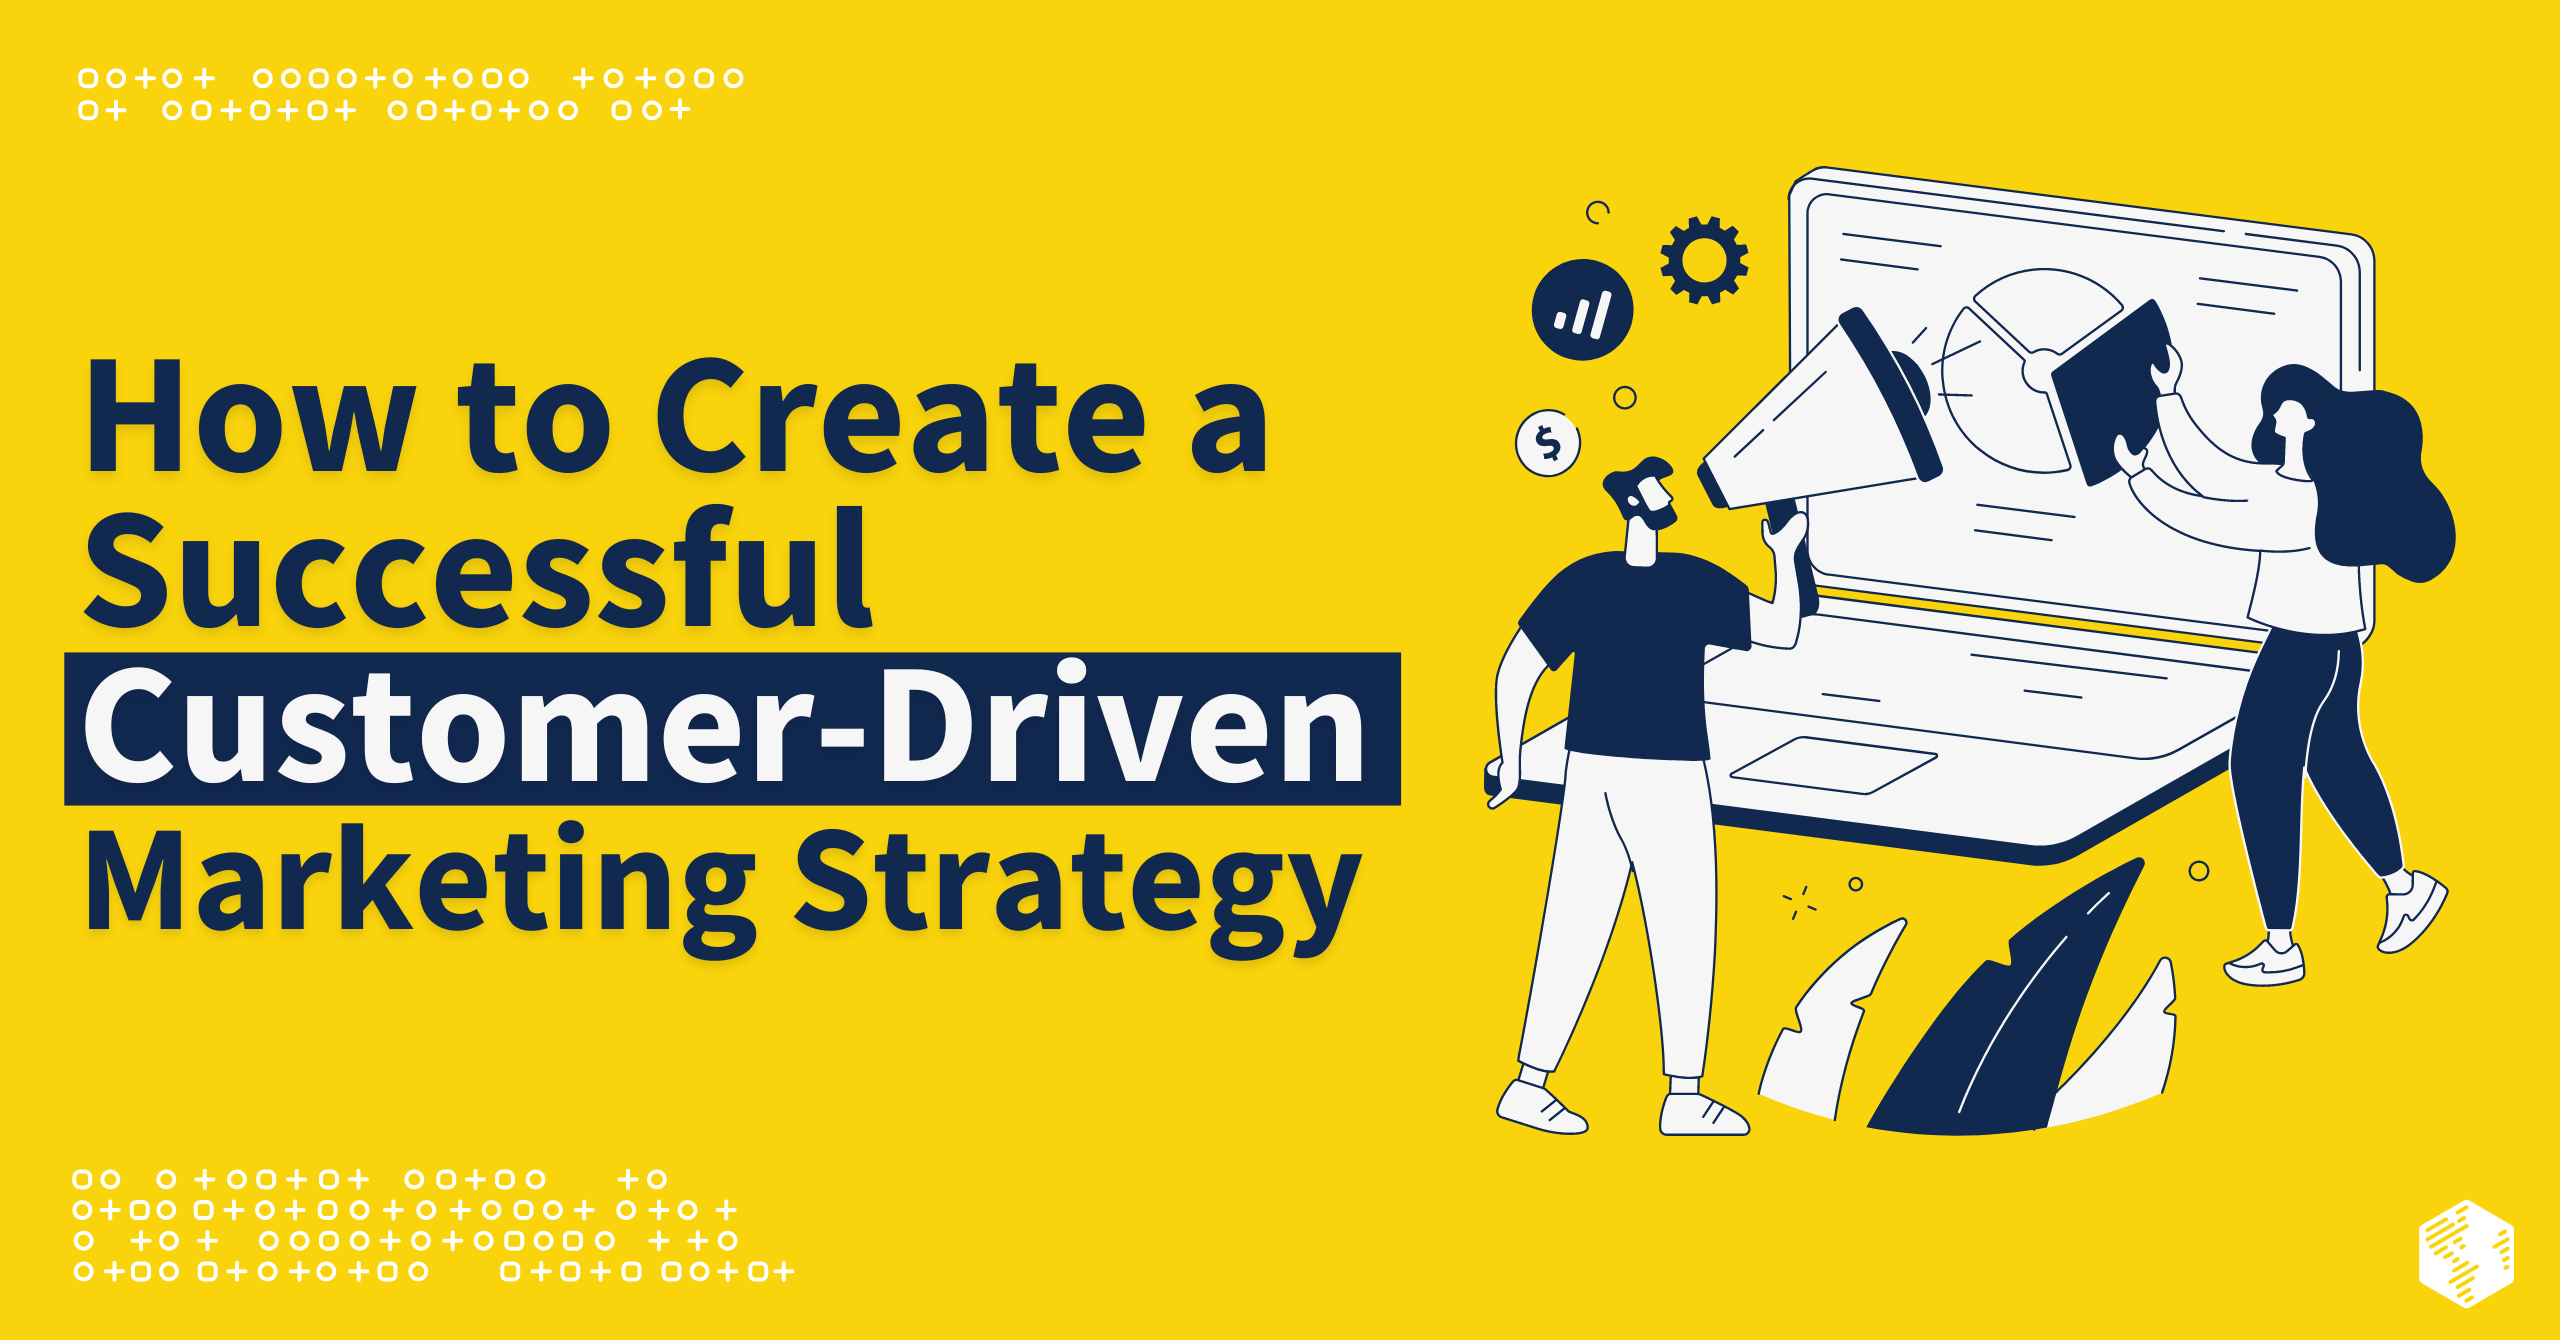 How to Create a Successful Customer-Driven Marketing Strategy